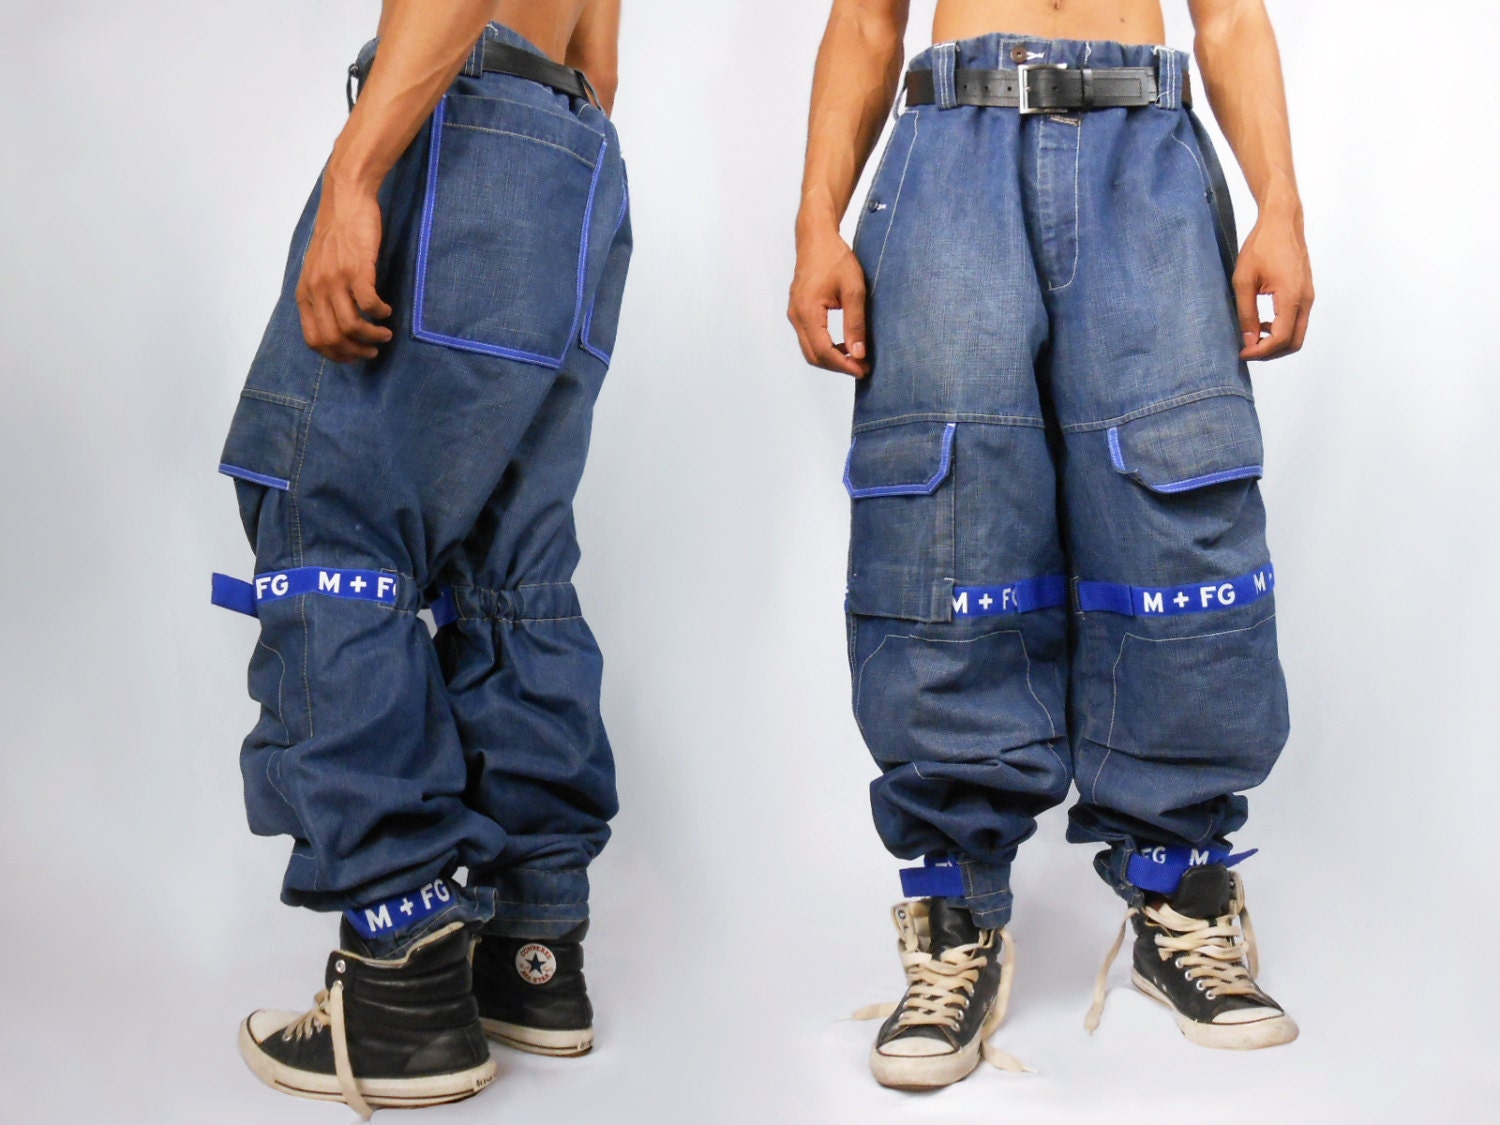 Vaporwave/ Mens Pants/ Cyber Ghetto/ Girbaud Jeans/ Baggy